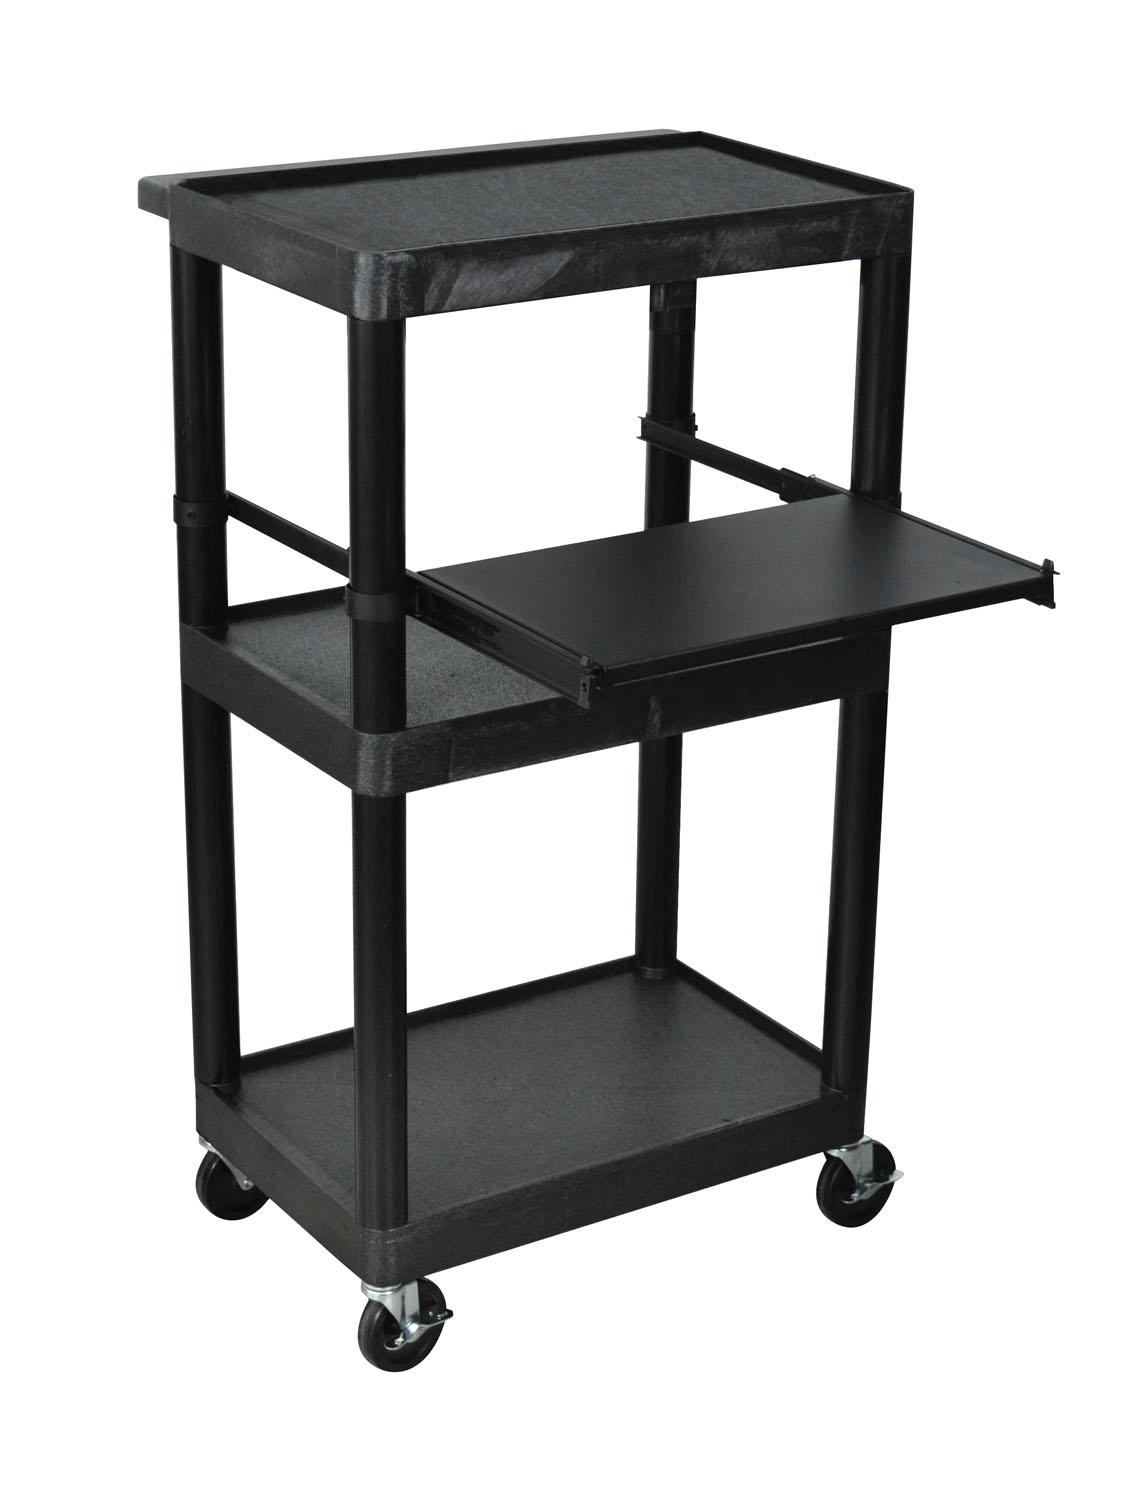 Luxor Office Presentation 24 In W X 15.75 In D X 43.5 In H 3 Shelf Cart With Tray Black